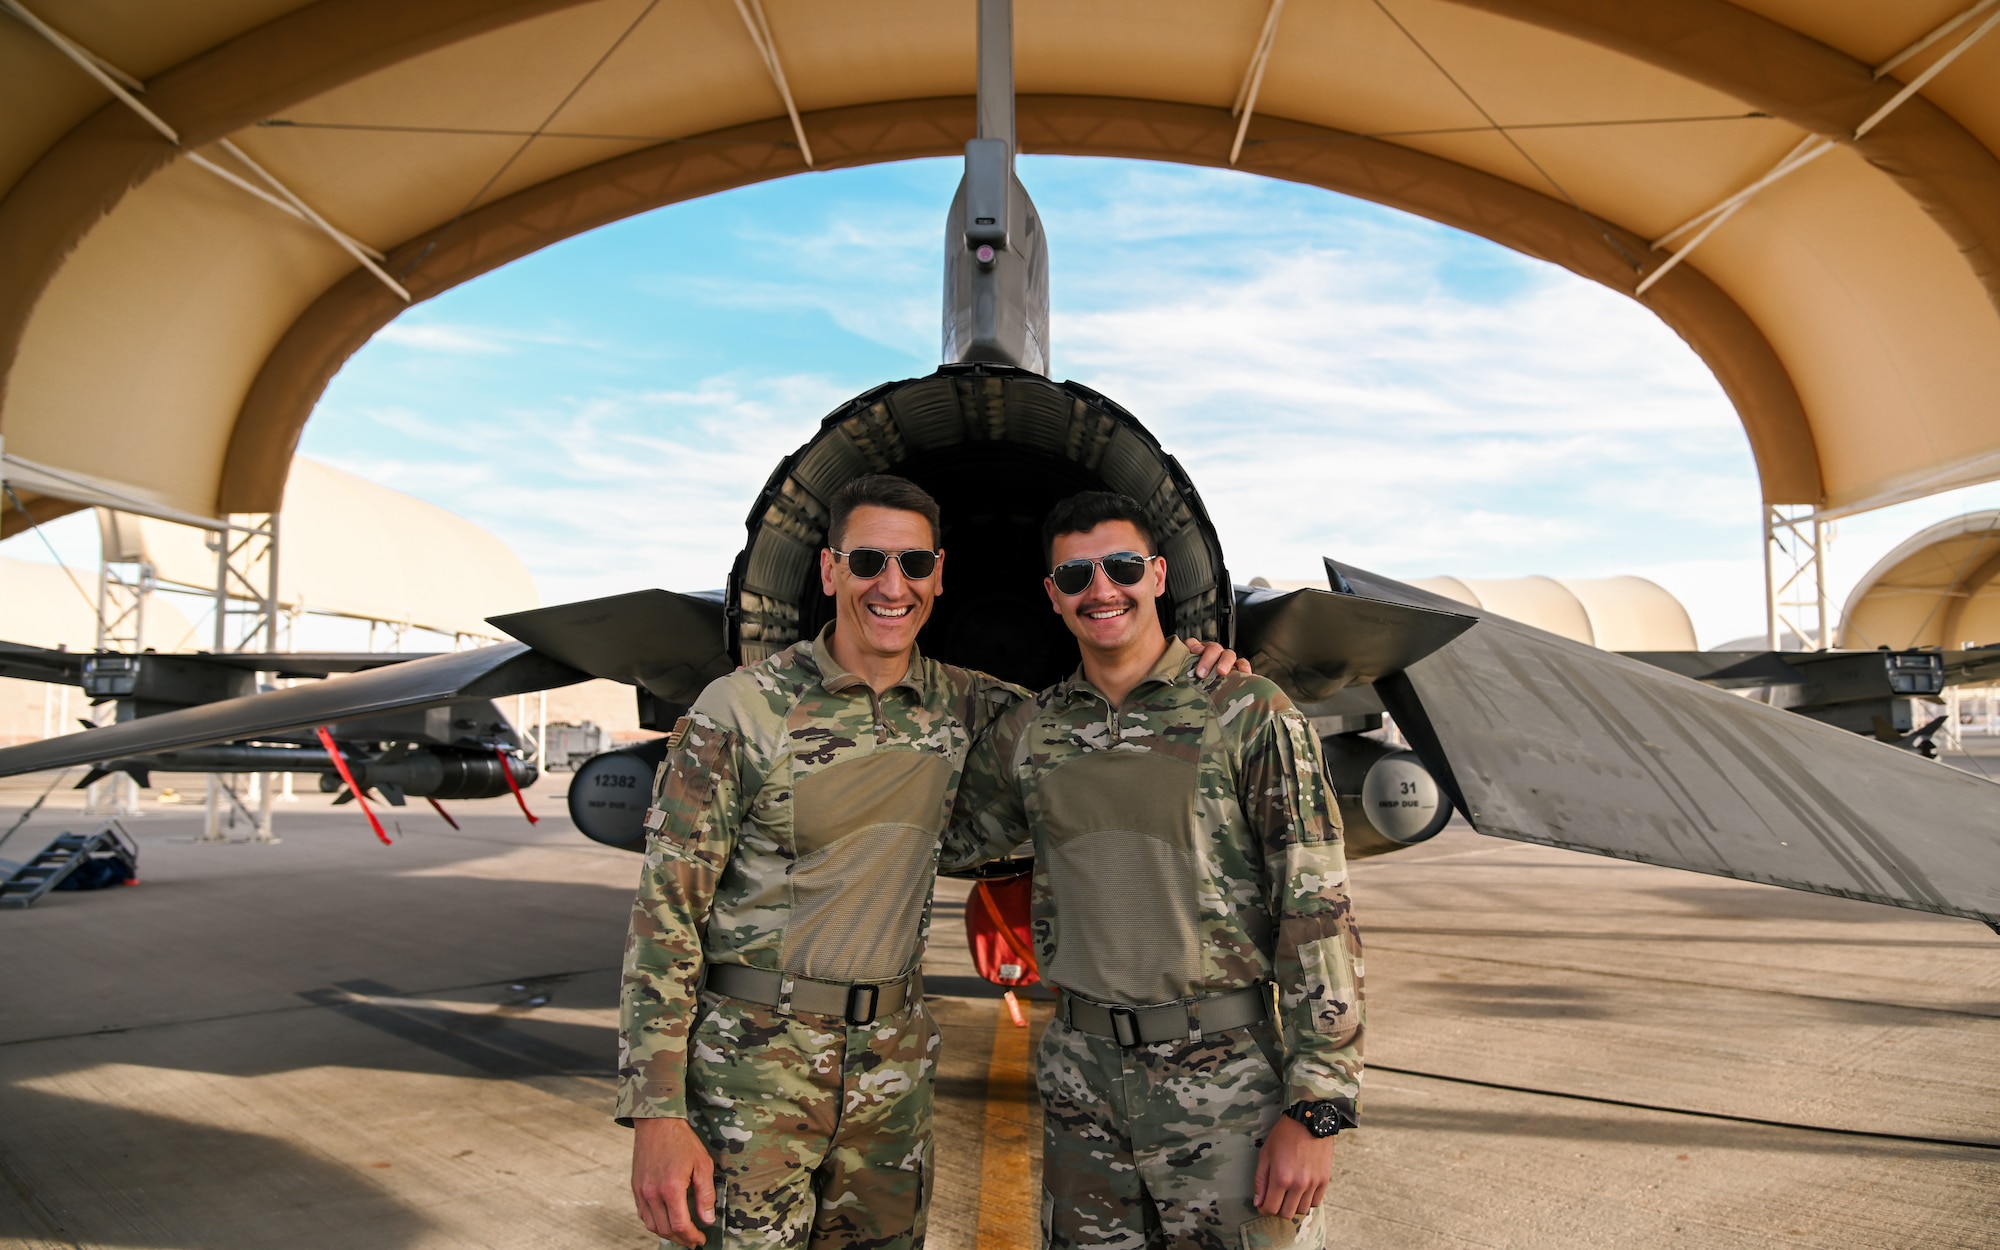 Senior Master Sgt. Steve Veers, 176th Expeditionary Fighter Squadron aerospace propulsion superintendent, and Airman 1st Class Isac Veers 176th EFS aviation resource management journeyman, pose for a photo in front of an F-16 Fighting Falcon at Prince Sultan Air Base, Kingdom of Saudi Arabia, Dec. 13, 2021. The father and son duo deployed to the 378th Air Expeditionary Wing together from the 115th Fighter Wing, Madison, Wisconsin. (U.S. Air Force photo by Staff Sgt. Christina Graves)